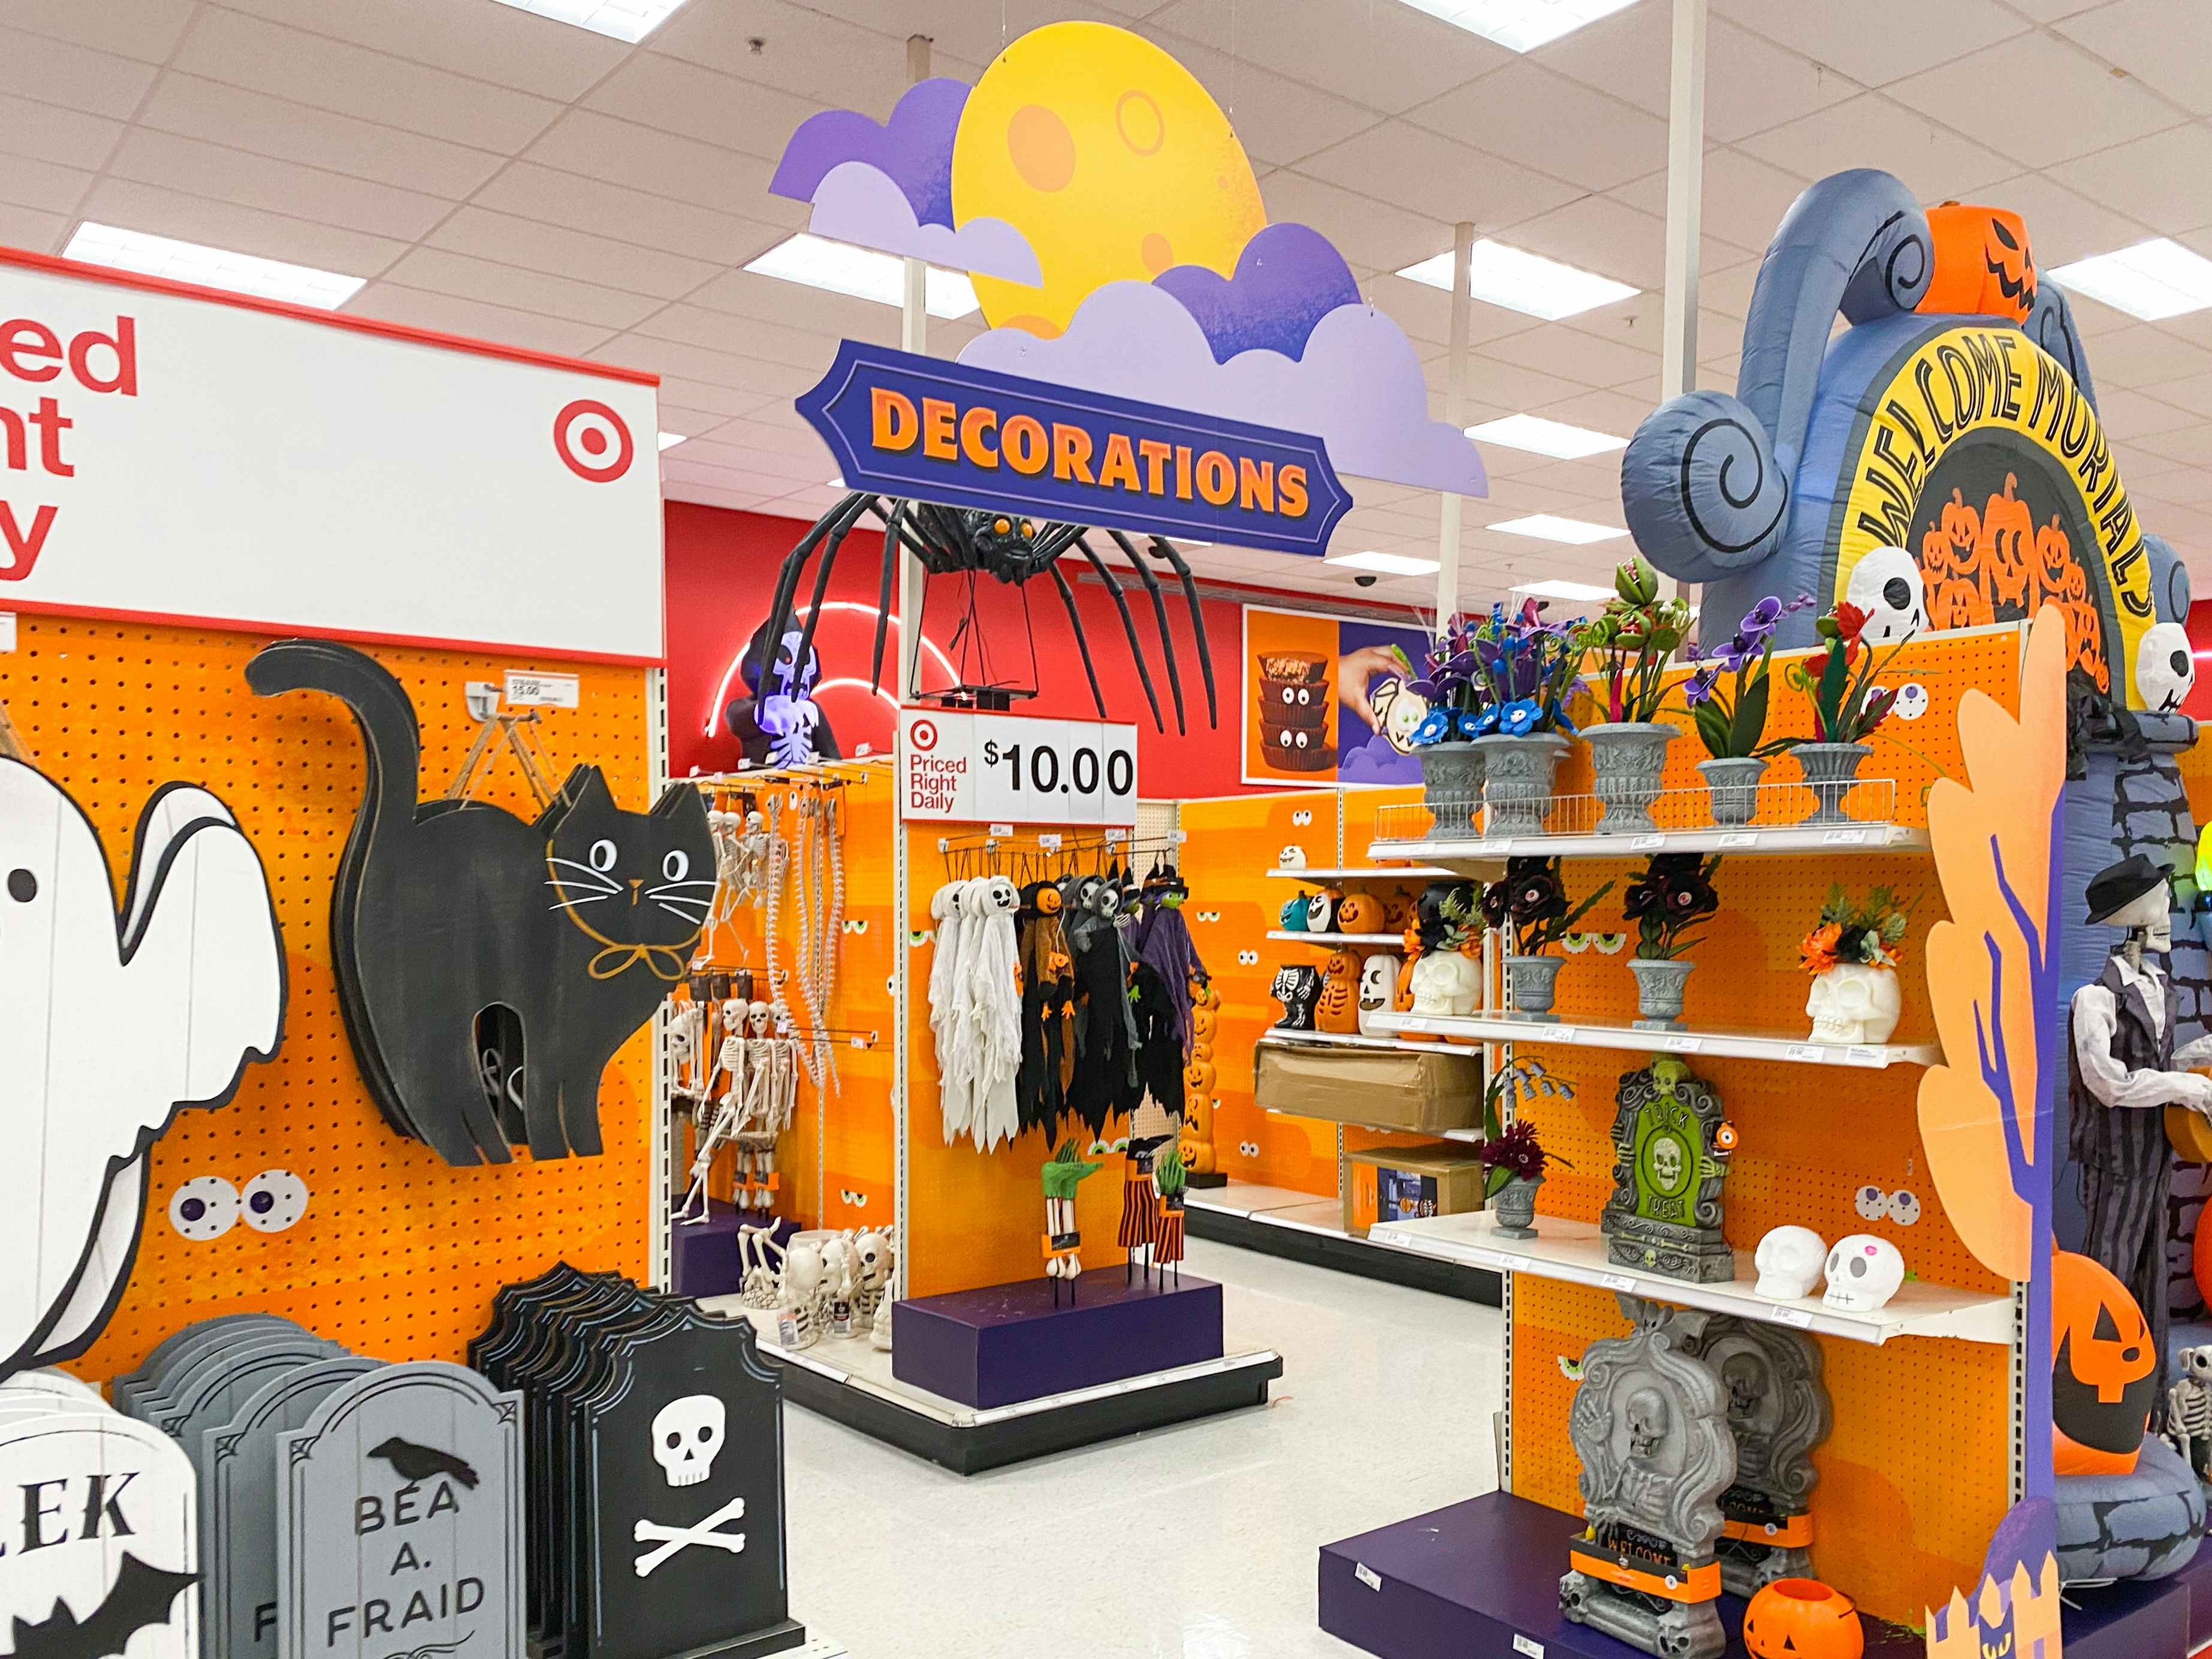 The Target Halloween Decorations section.